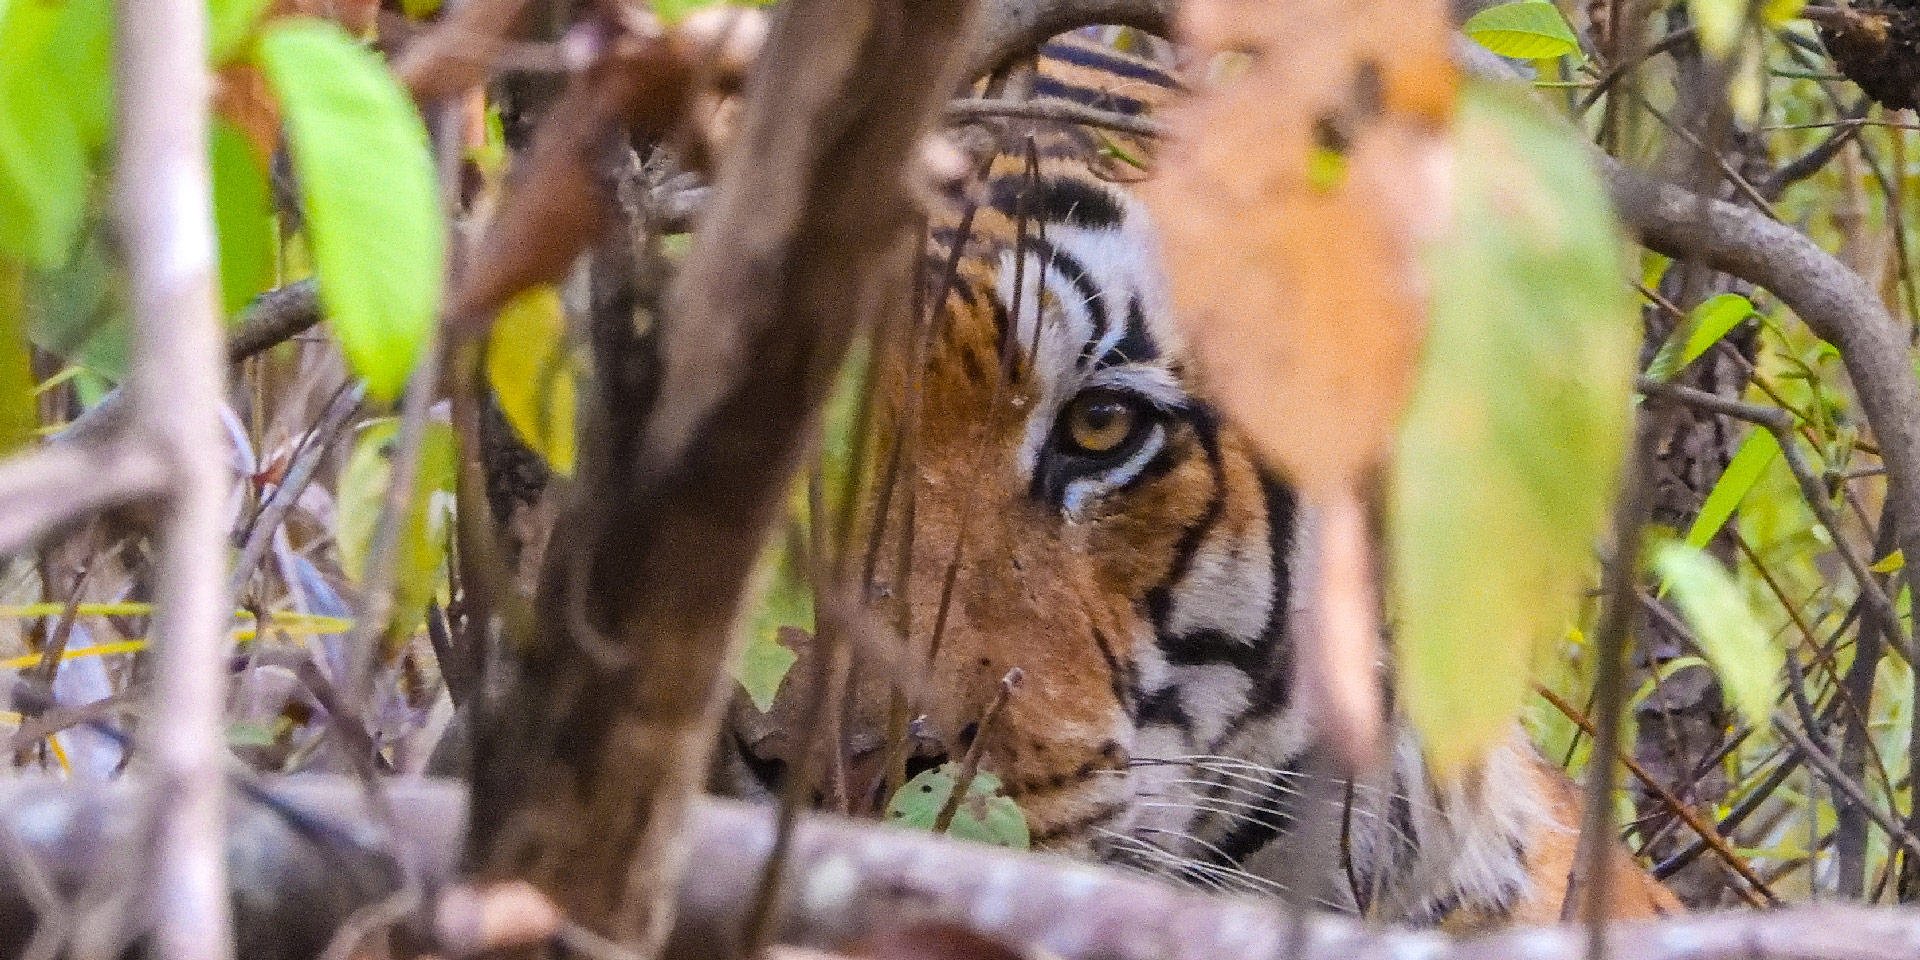 kanha-national-park-eye-of-the-tiger-travelwith